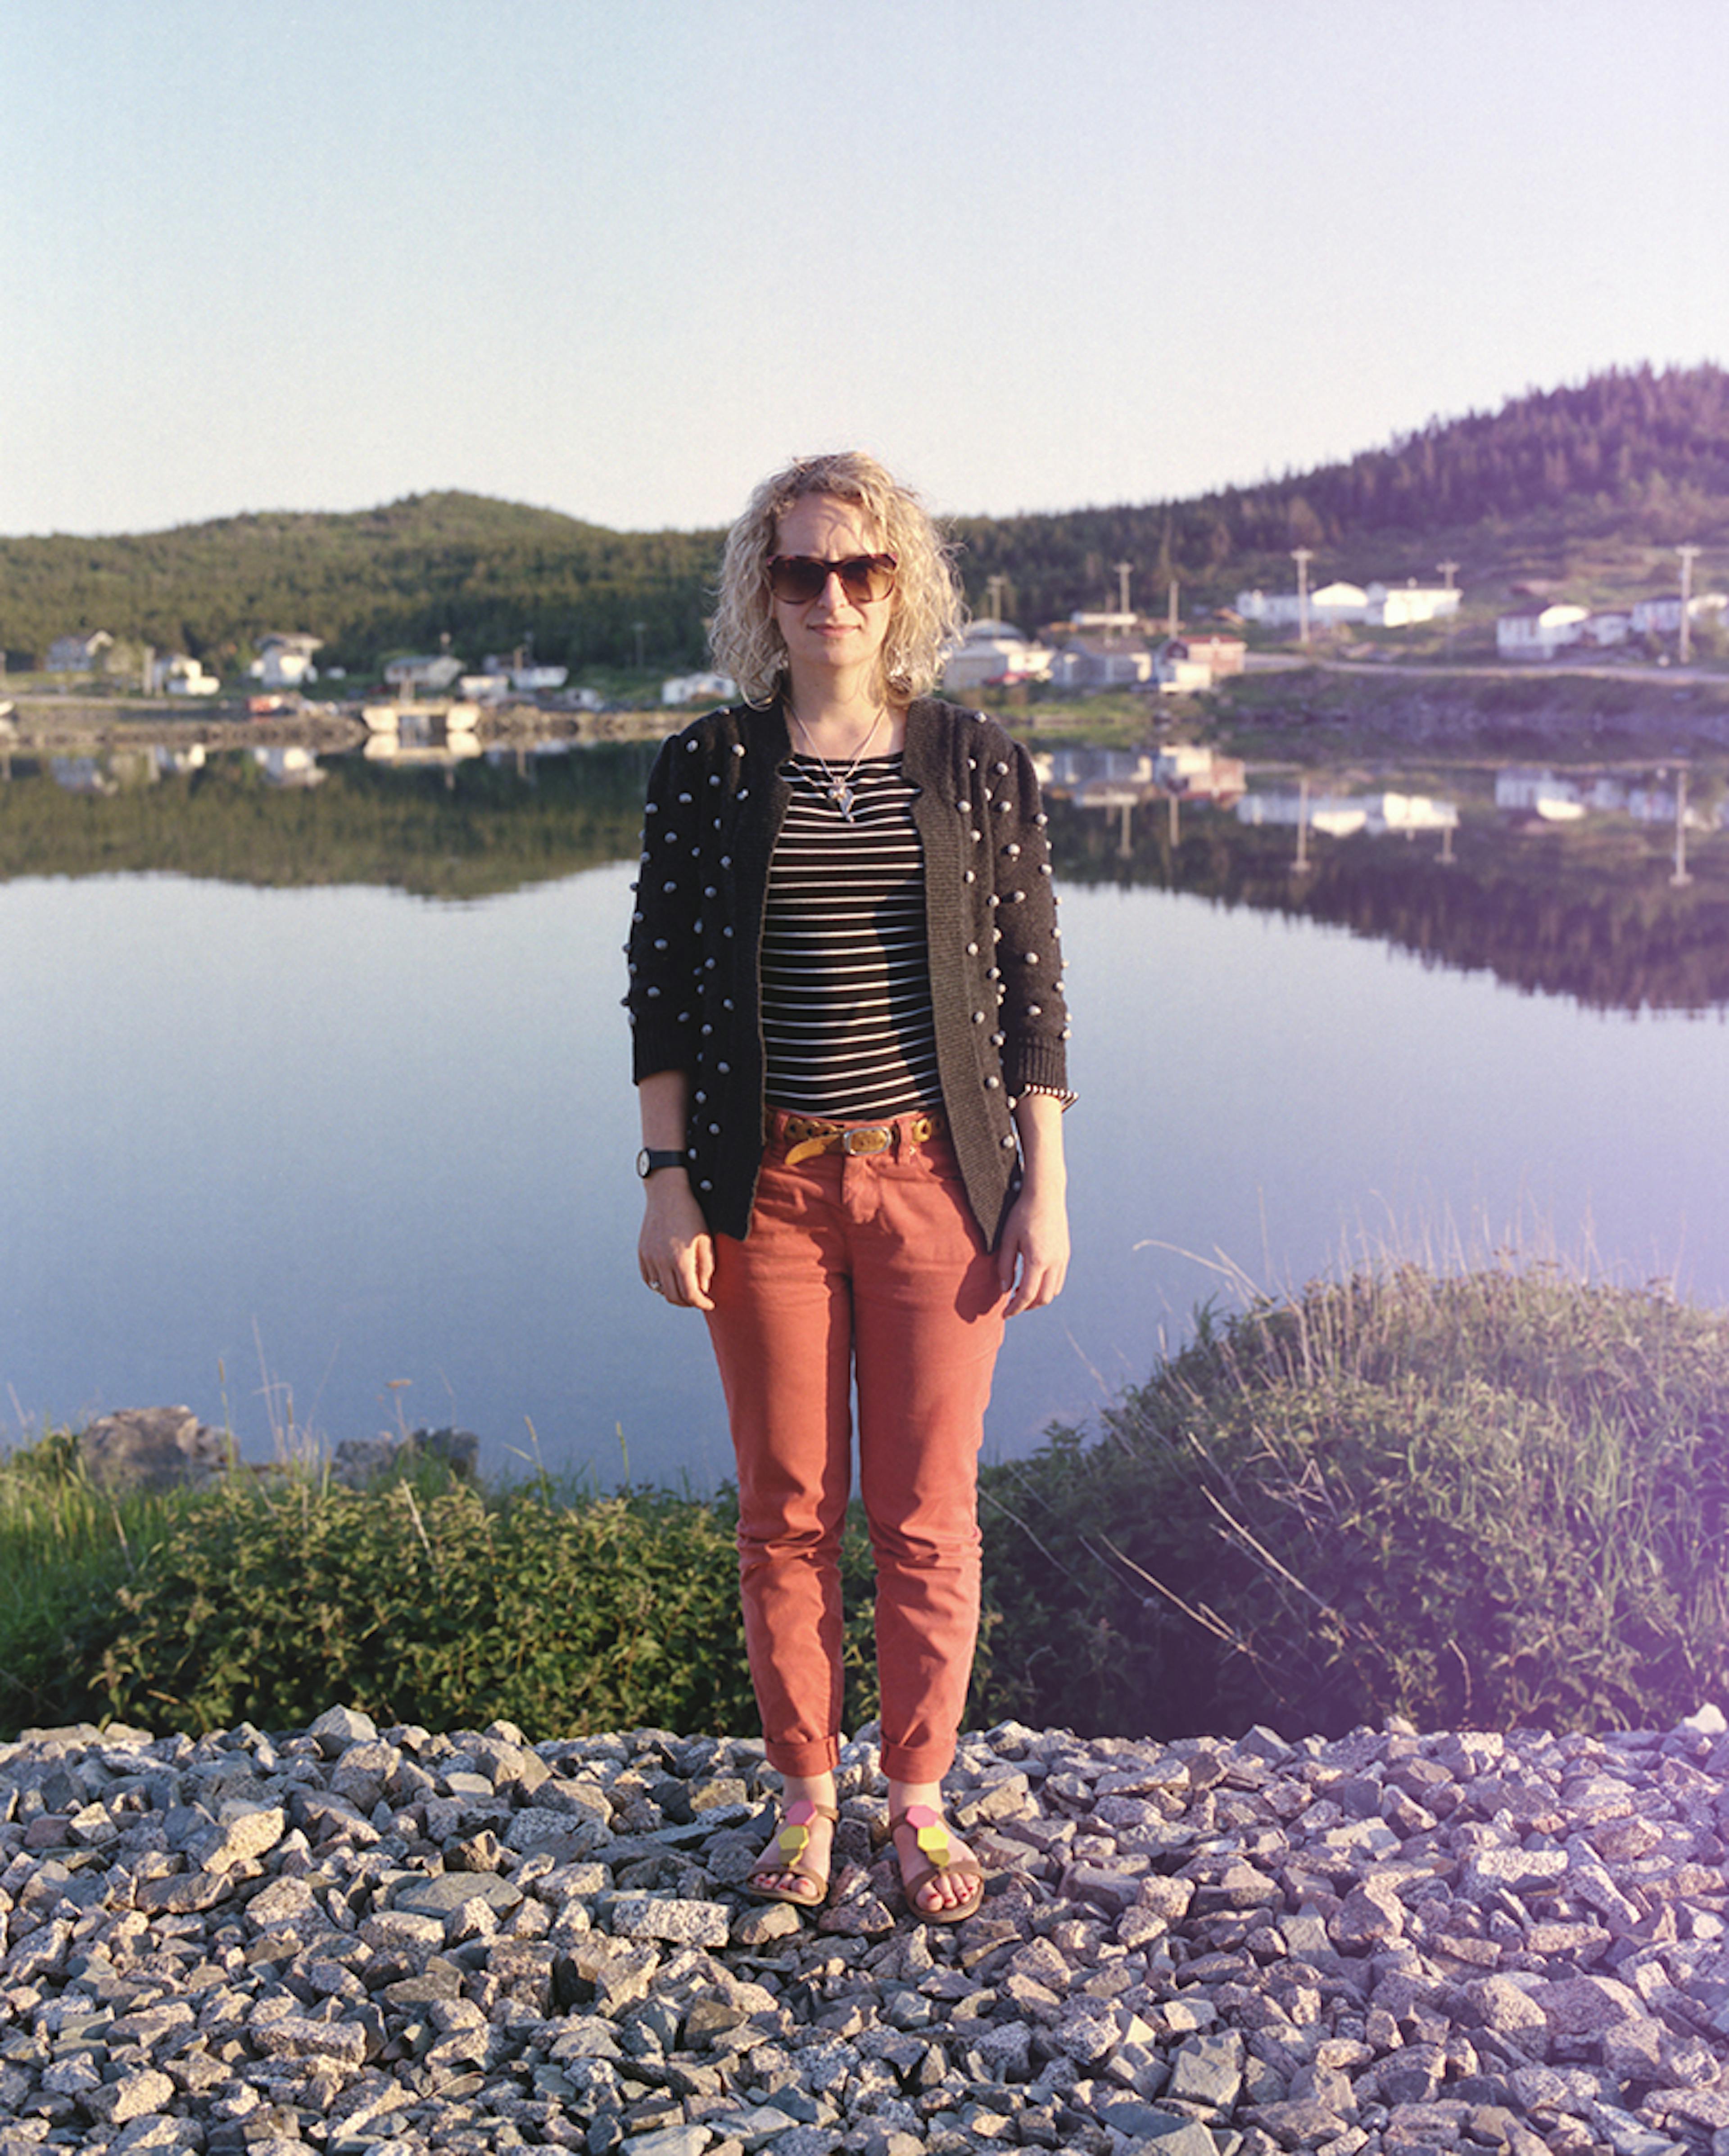 image of Yvonne Mullock in front of a backdrop of ocean and houses. She has curly shoulder-length hair, and is wearing sunglasses, a striped top with a black-and-white polka-dotted cami, and red pants. 